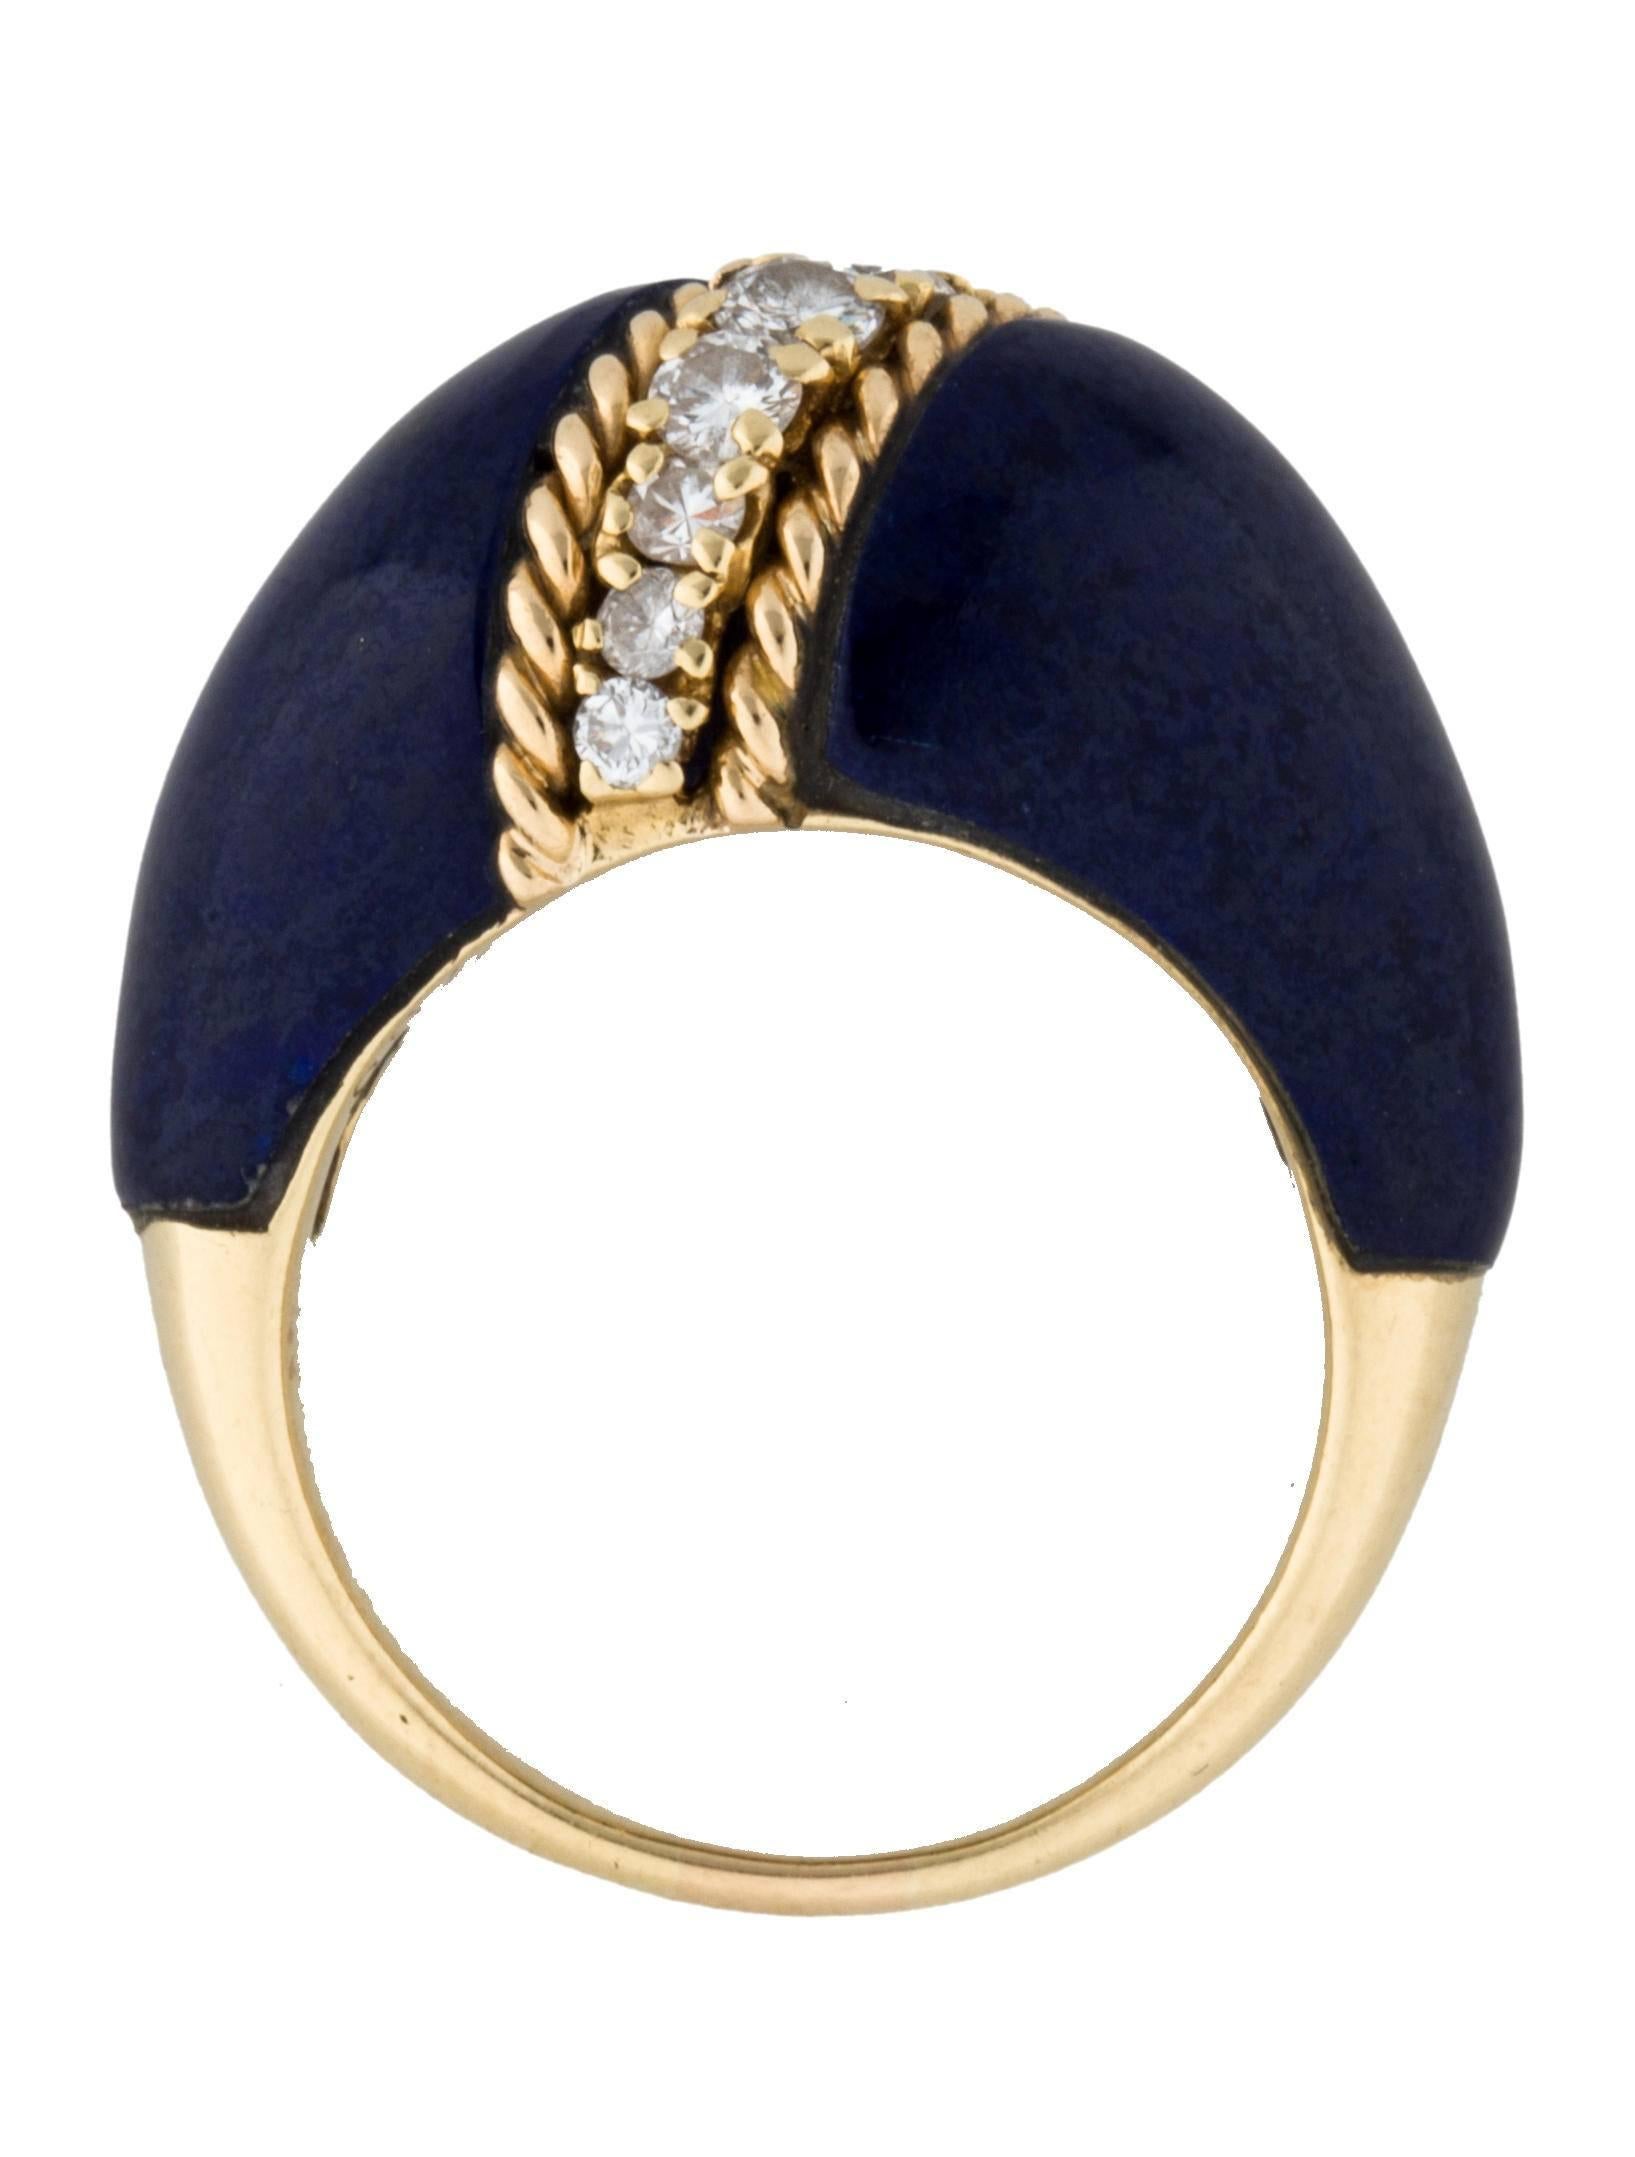 18K yellow gold Van Cleef & Arpels Vintage dome cocktail ring with carved lapis lazuli featuring round brilliant diamond accents.

Ring Size: 7.5
Metal Type: 18K Yellow Gold
Hallmark: 18K, Brand Hallmark
Signature: Van Cleef & Arpels
Location: